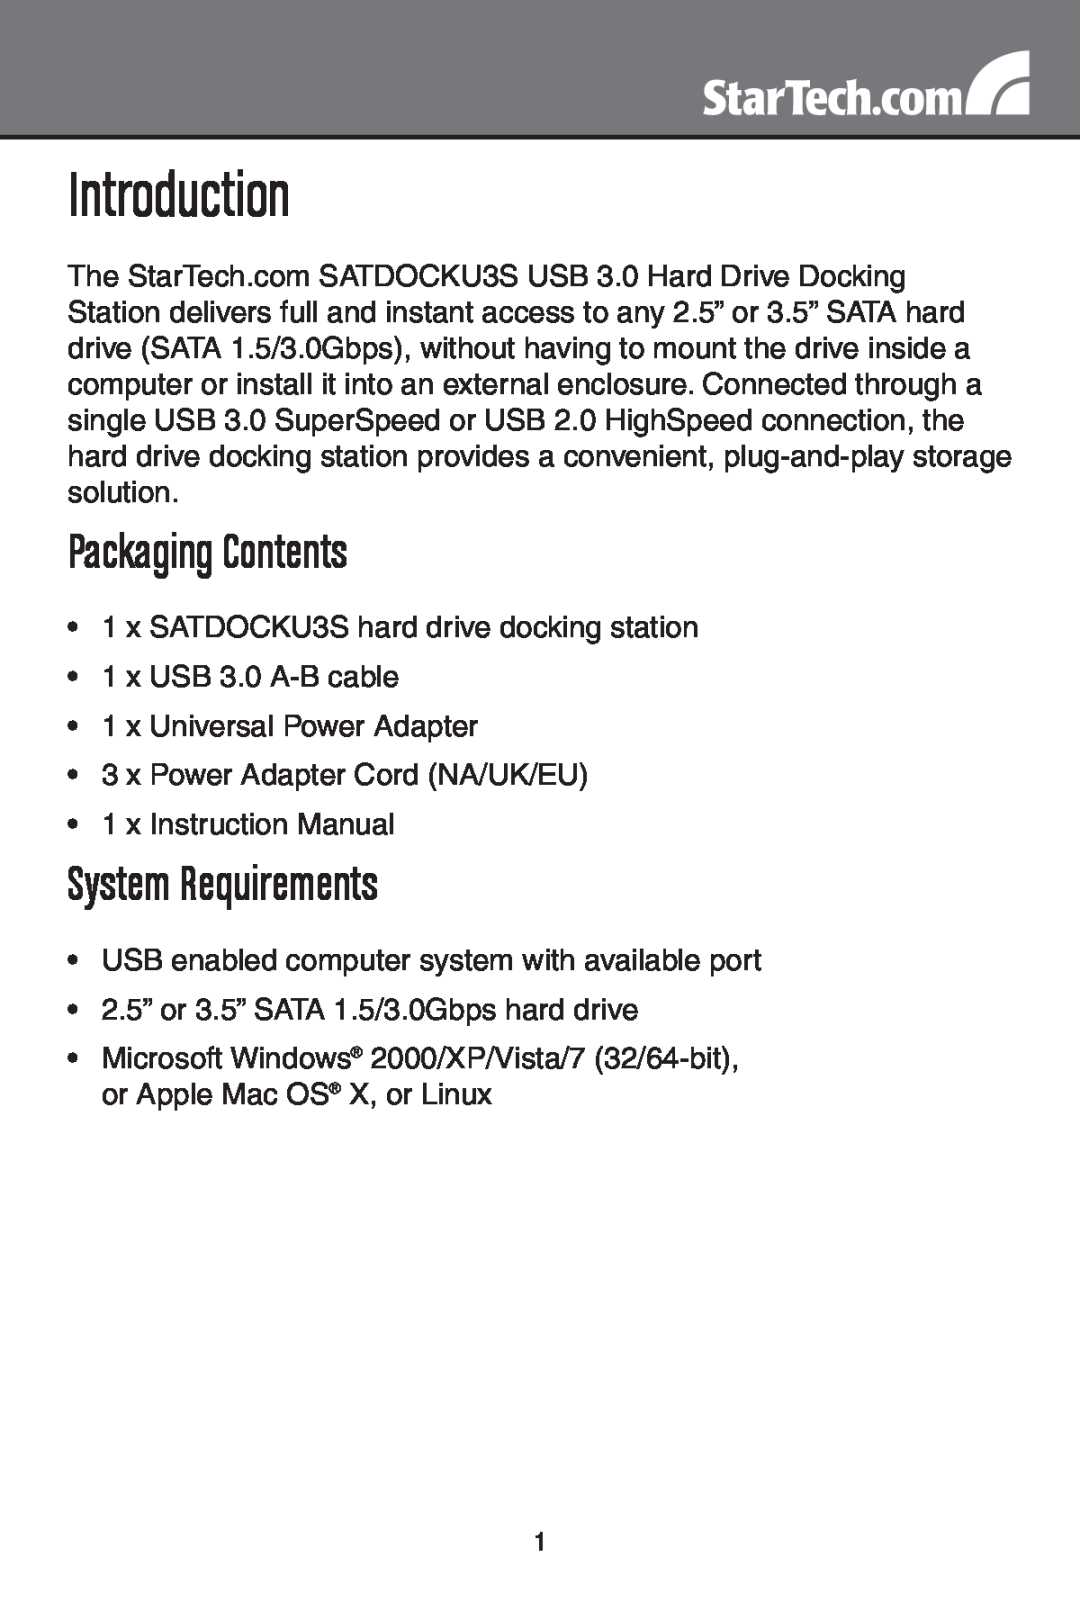 StarTech.com SATDOCKU3S instruction manual Introduction, Packaging Contents, System Requirements 